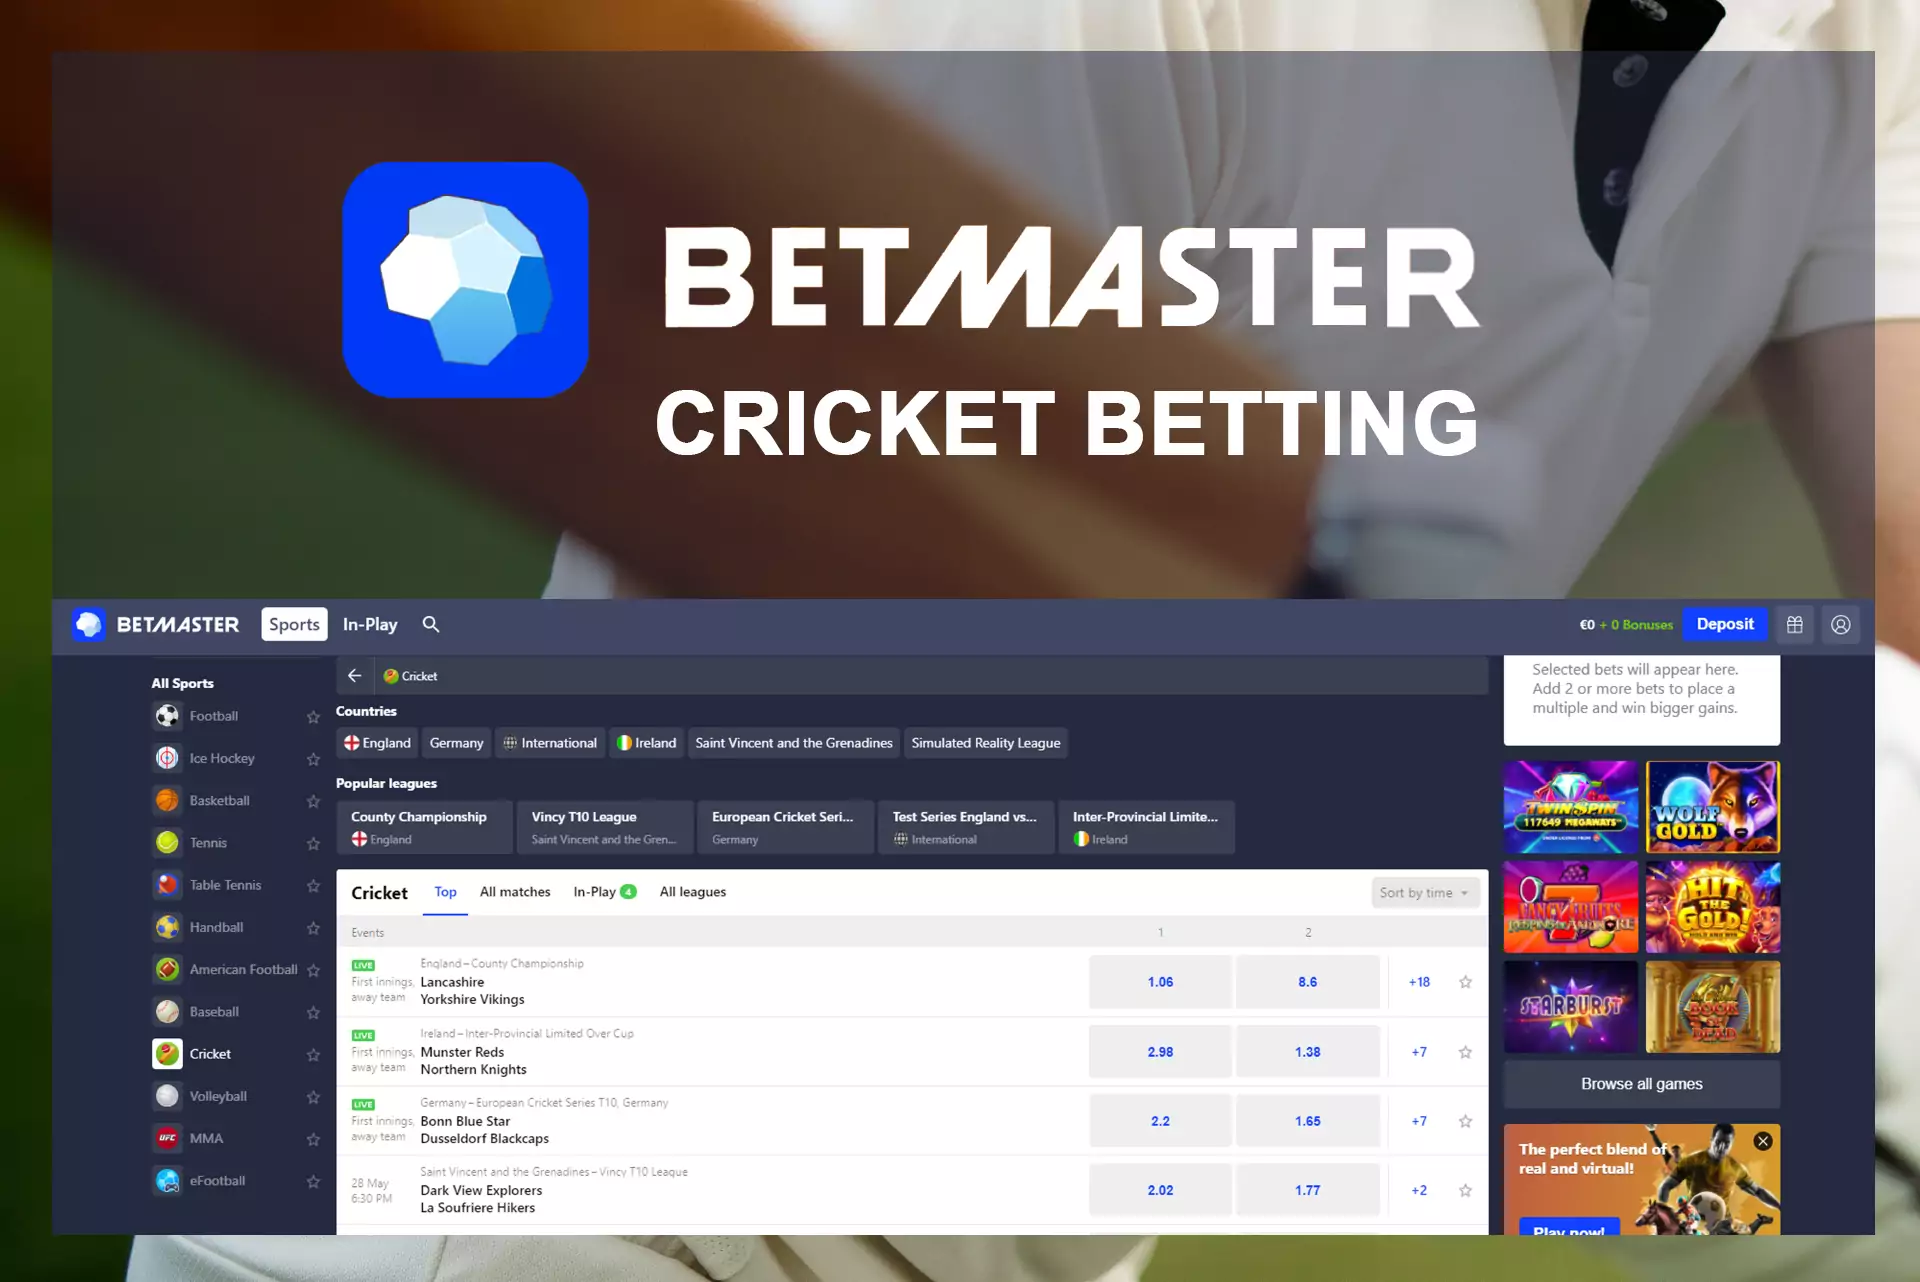 Choose the cricket team and place a bet on Betmaster.